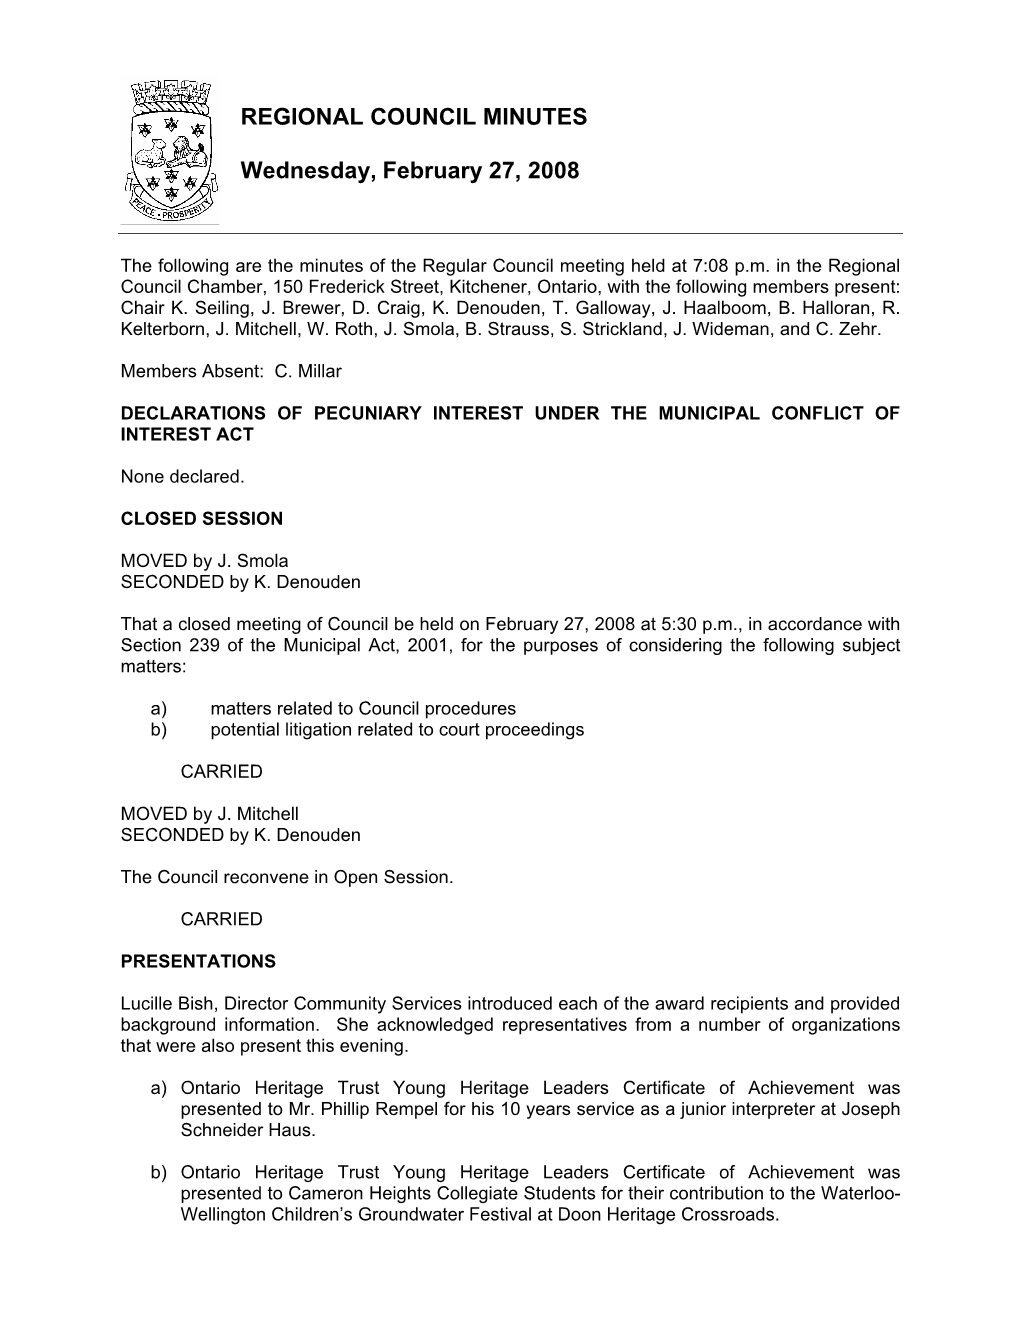 REGIONAL COUNCIL MINUTES Wednesday, February 27, 2008